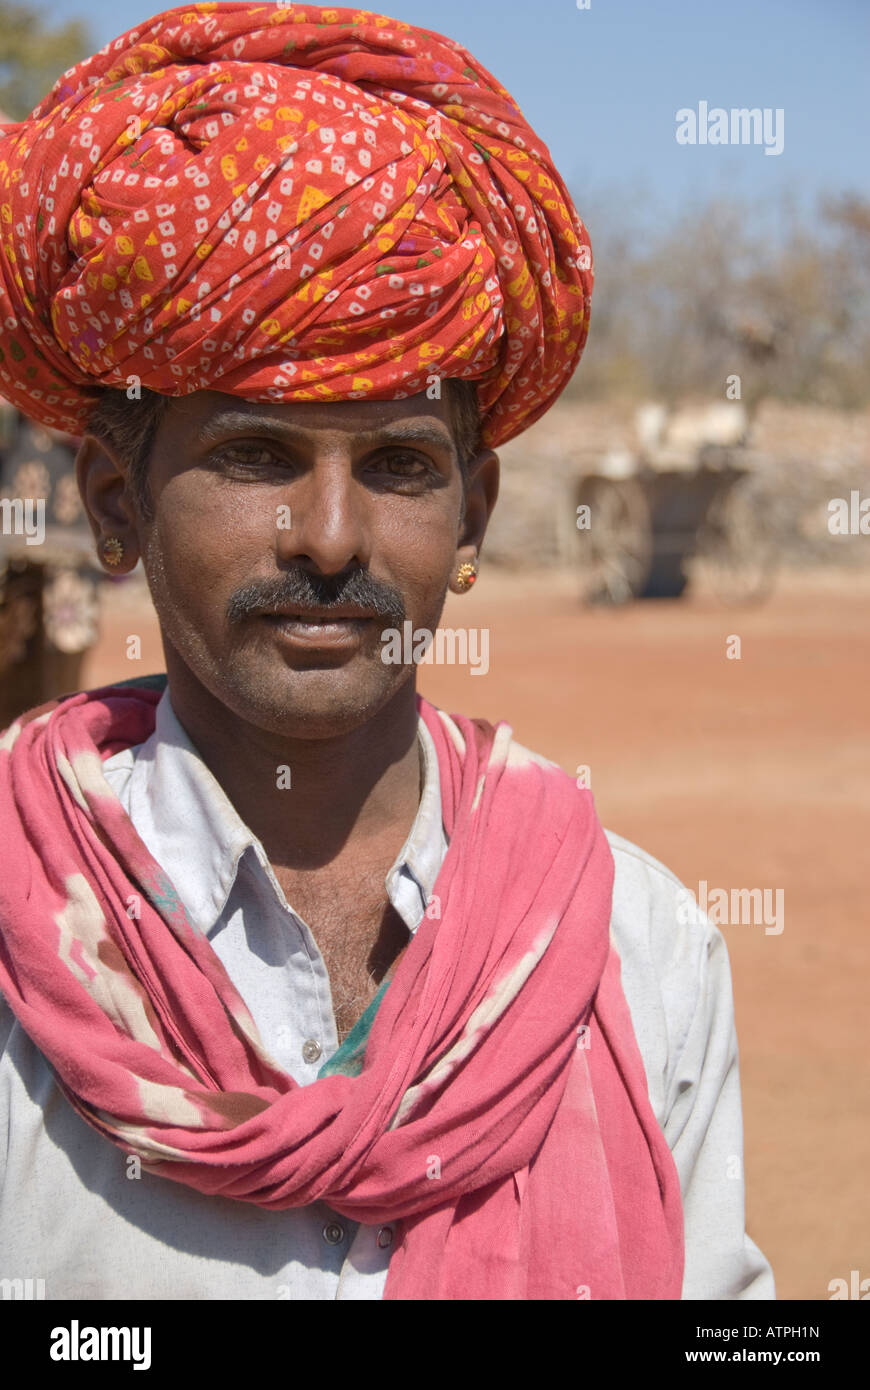 Indian Camel Driver with Turban and Scarf Stock Photo